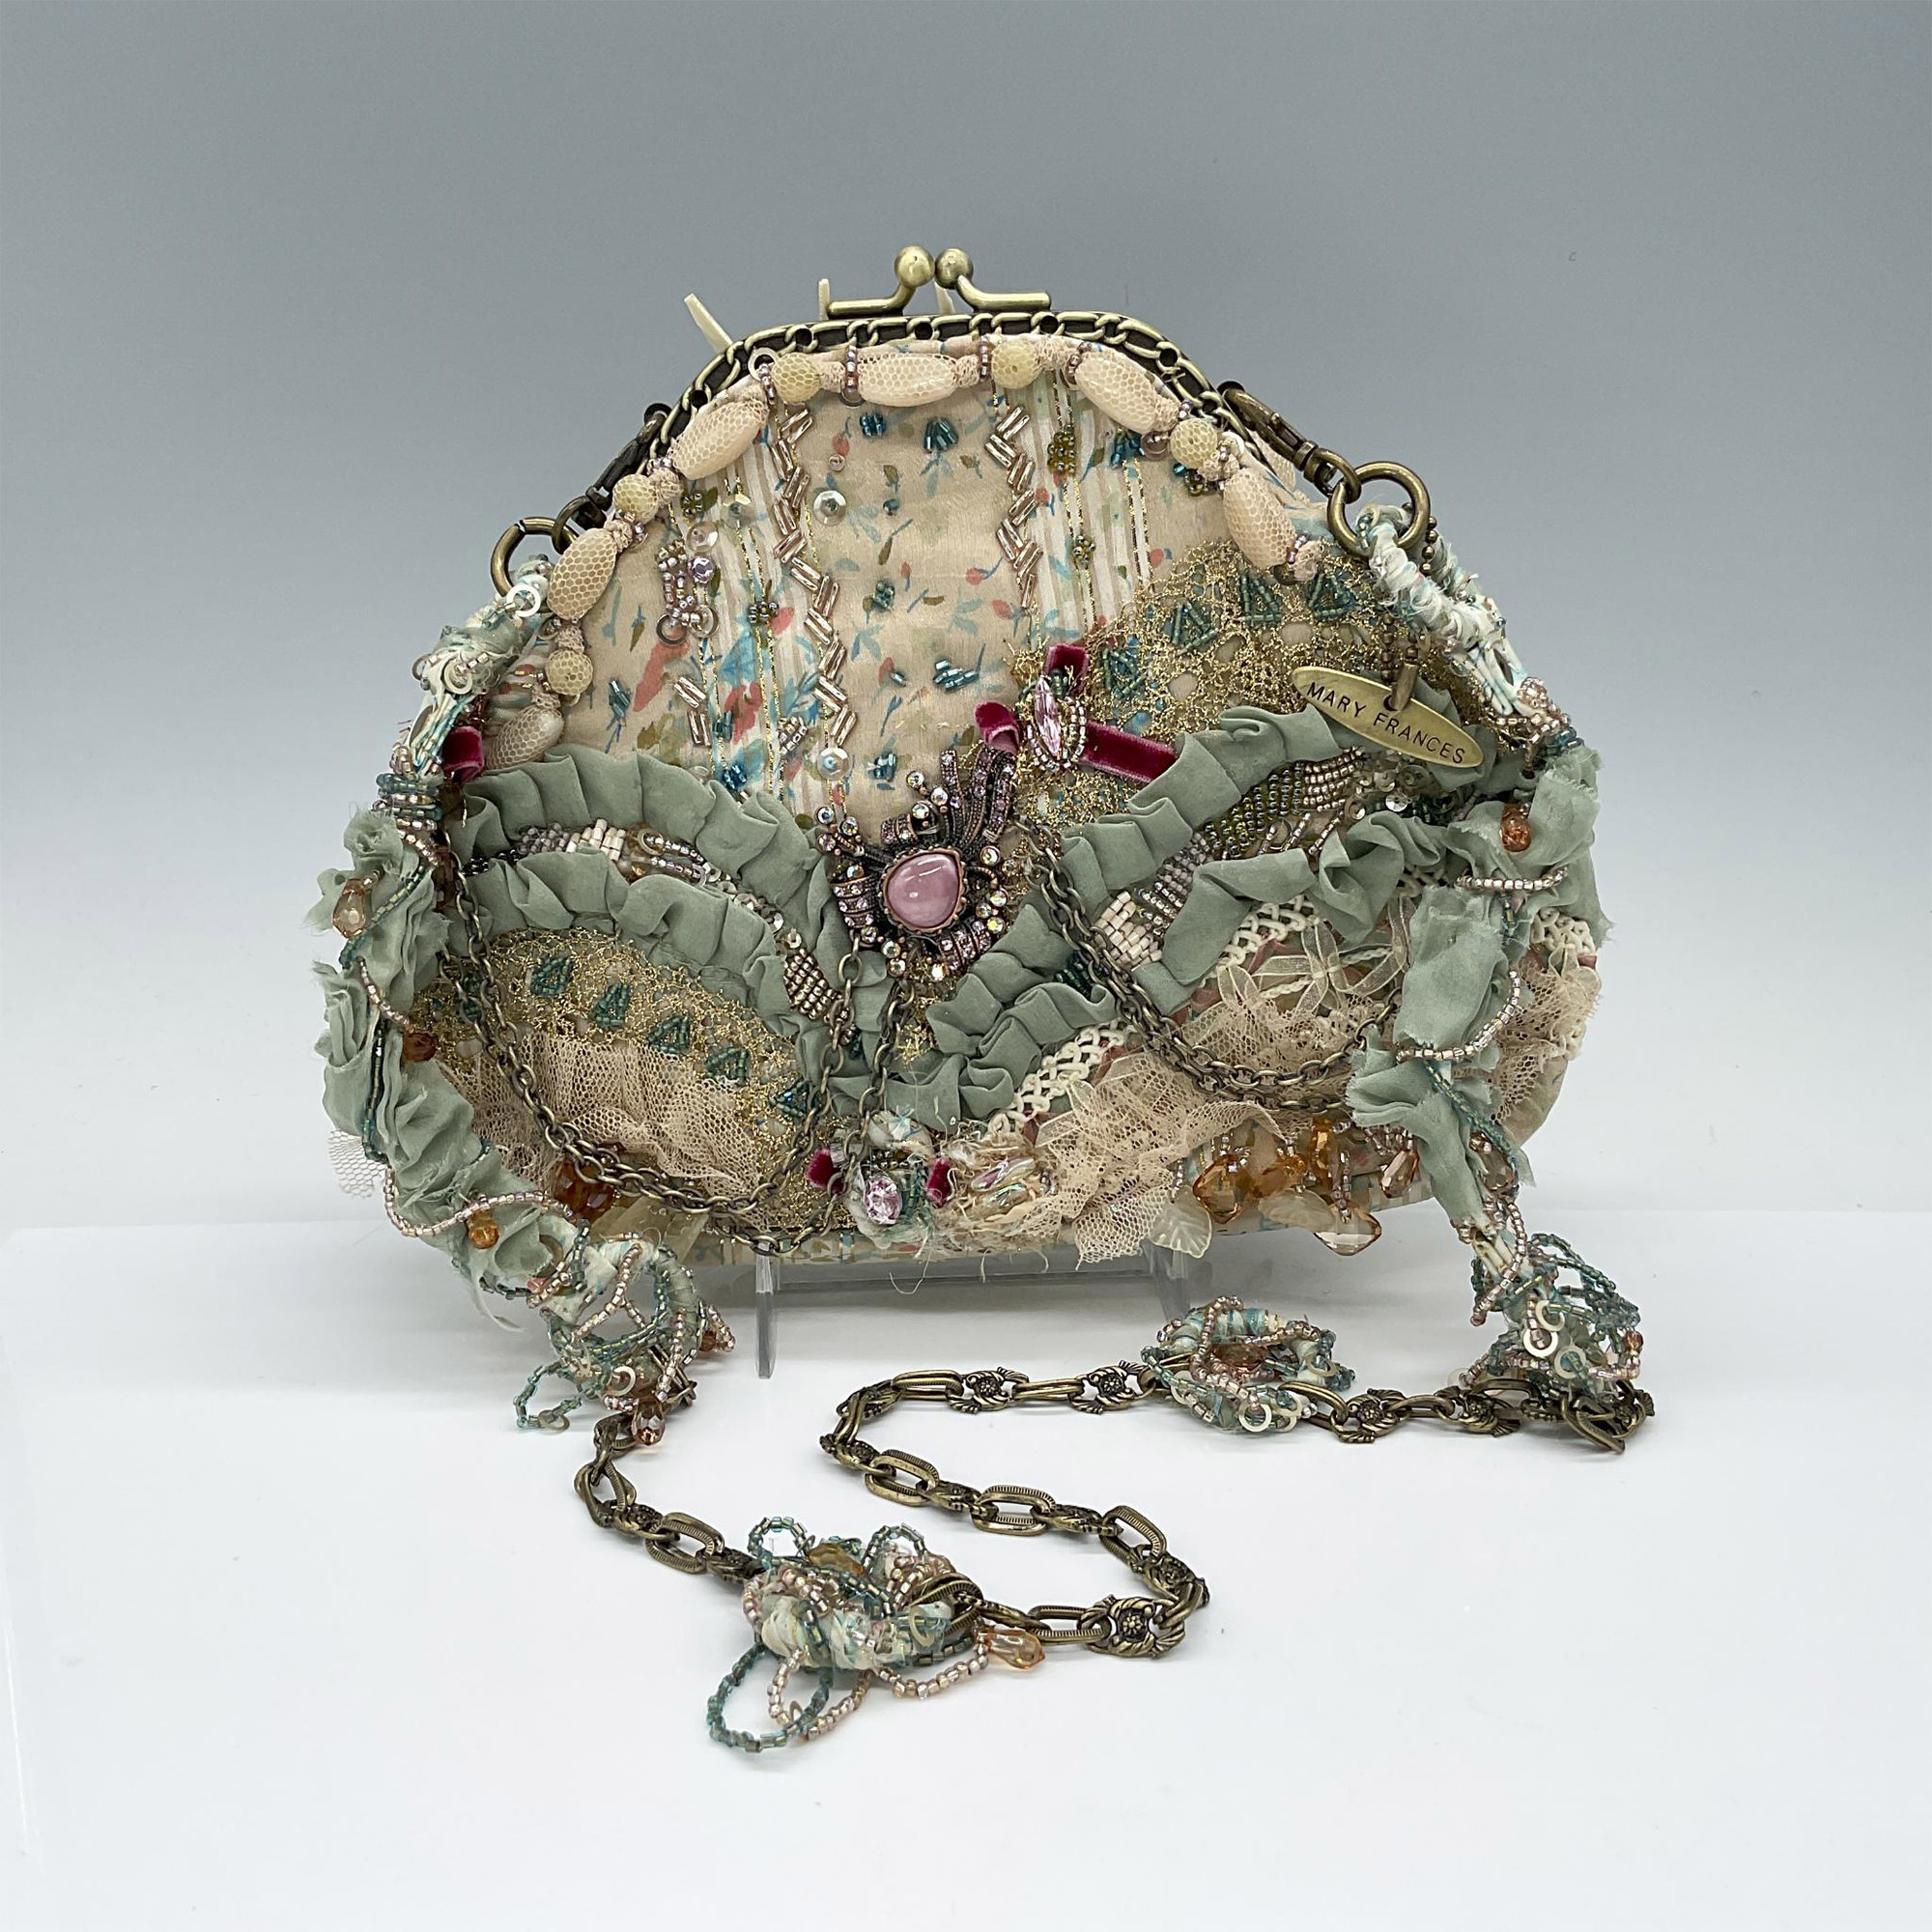 Mary Frances Clutch, Shabby Chic - Image 2 of 4